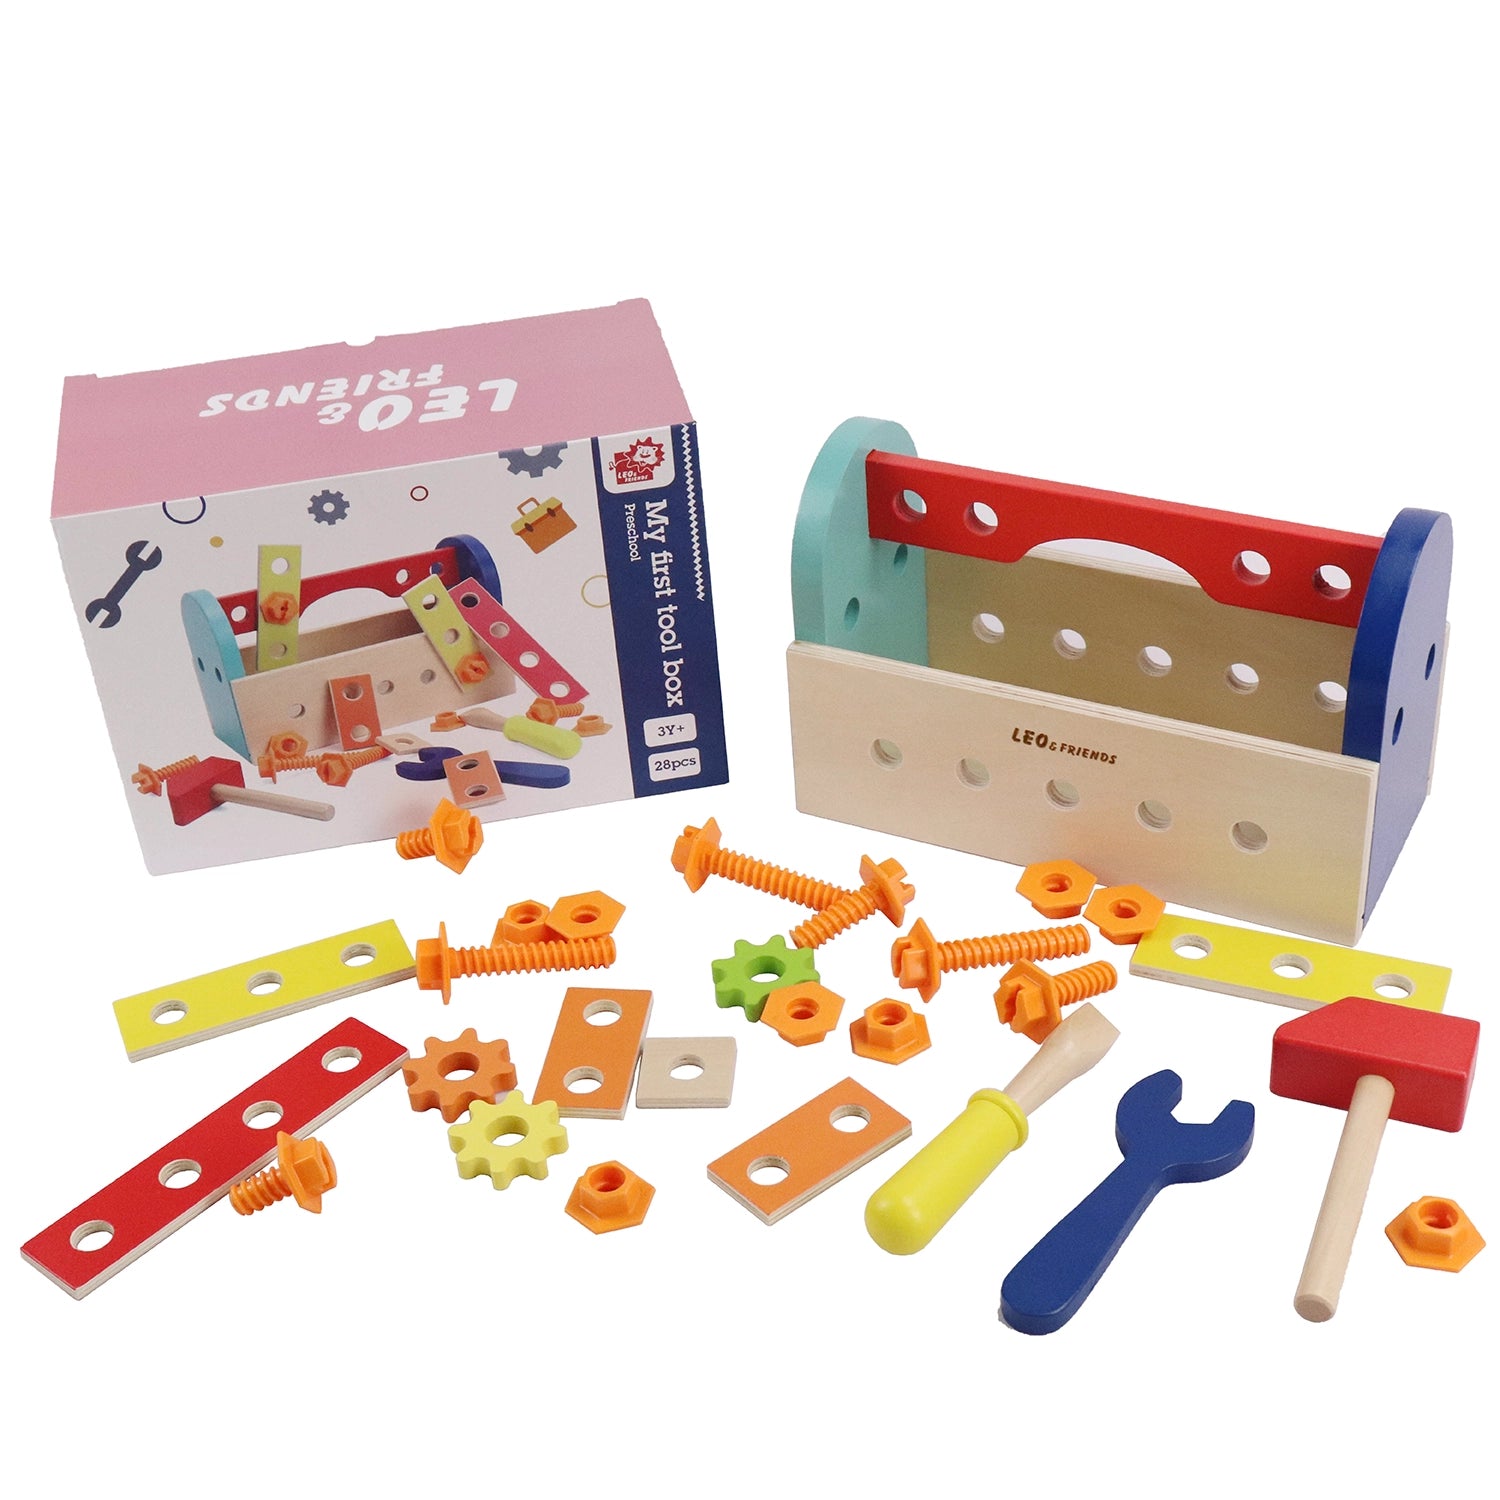 ‘My First Tool Box’ Kit of 28 Wooden Pieces, Made For 3-Year-Olds and Older